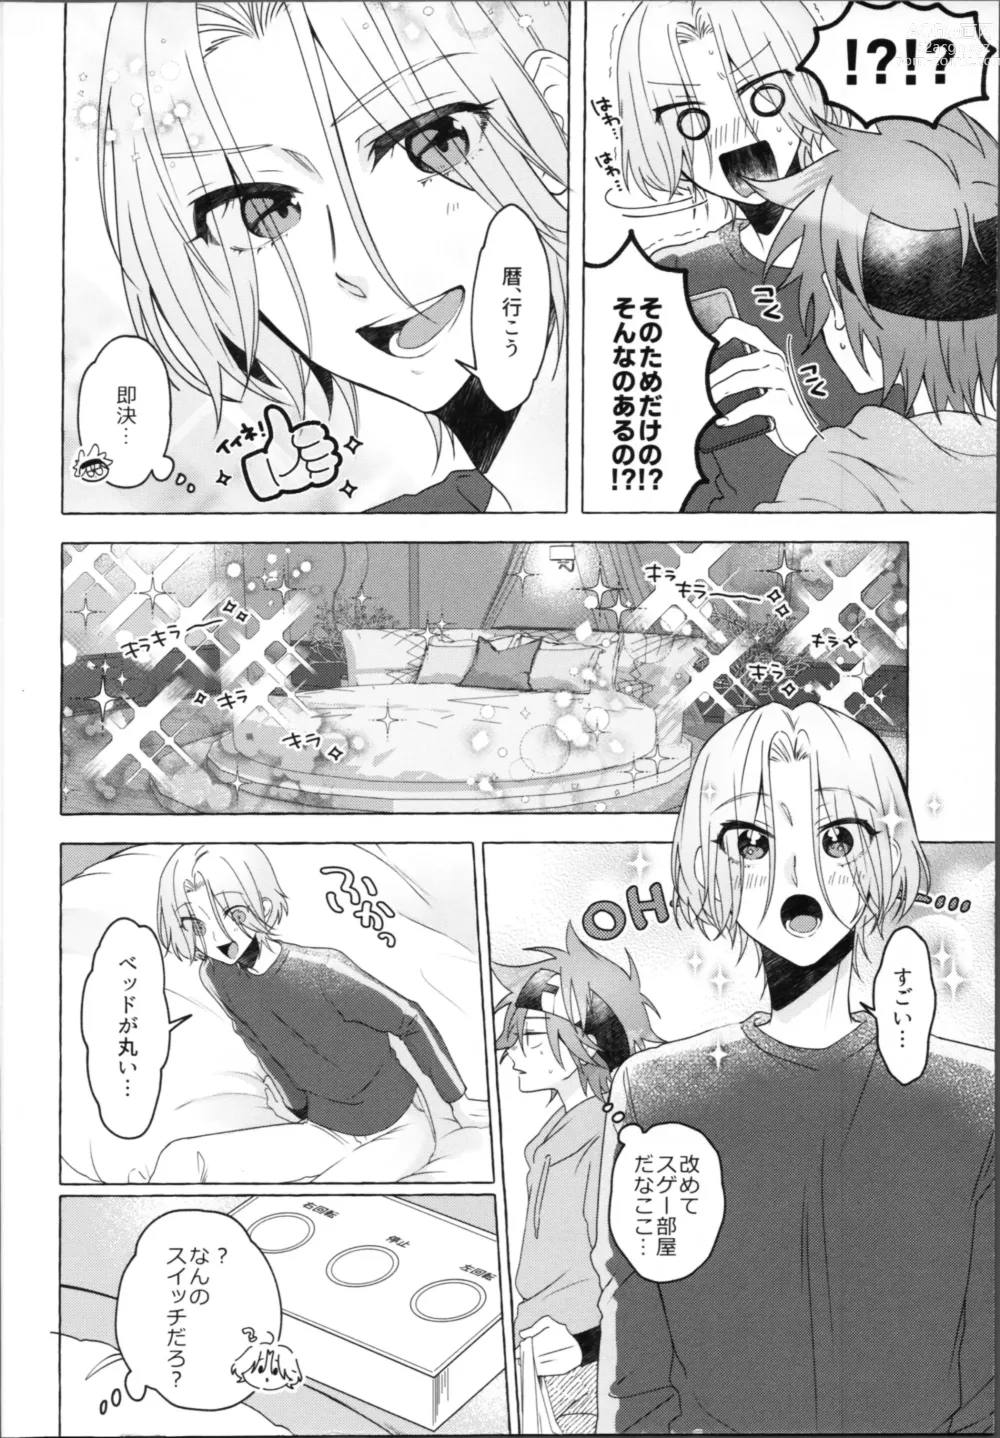 Page 7 of doujinshi Love Hotel tte Donna Toko?